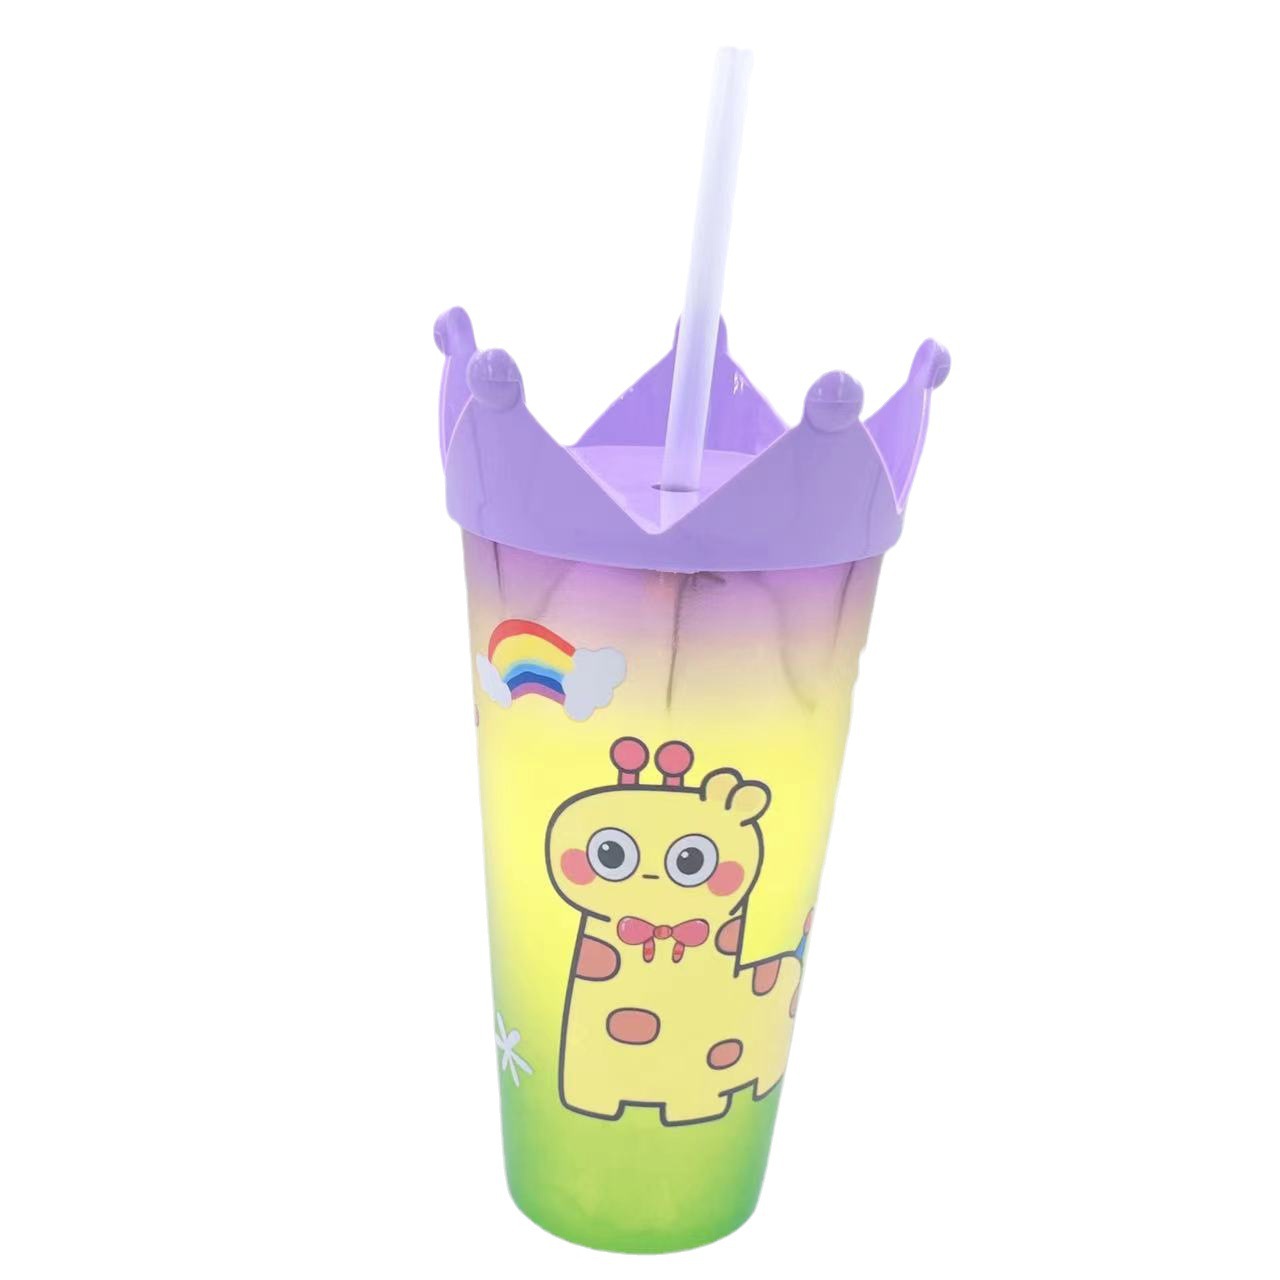 New Plastic Water Cup Creative Cartoon Animal Cup with Straw